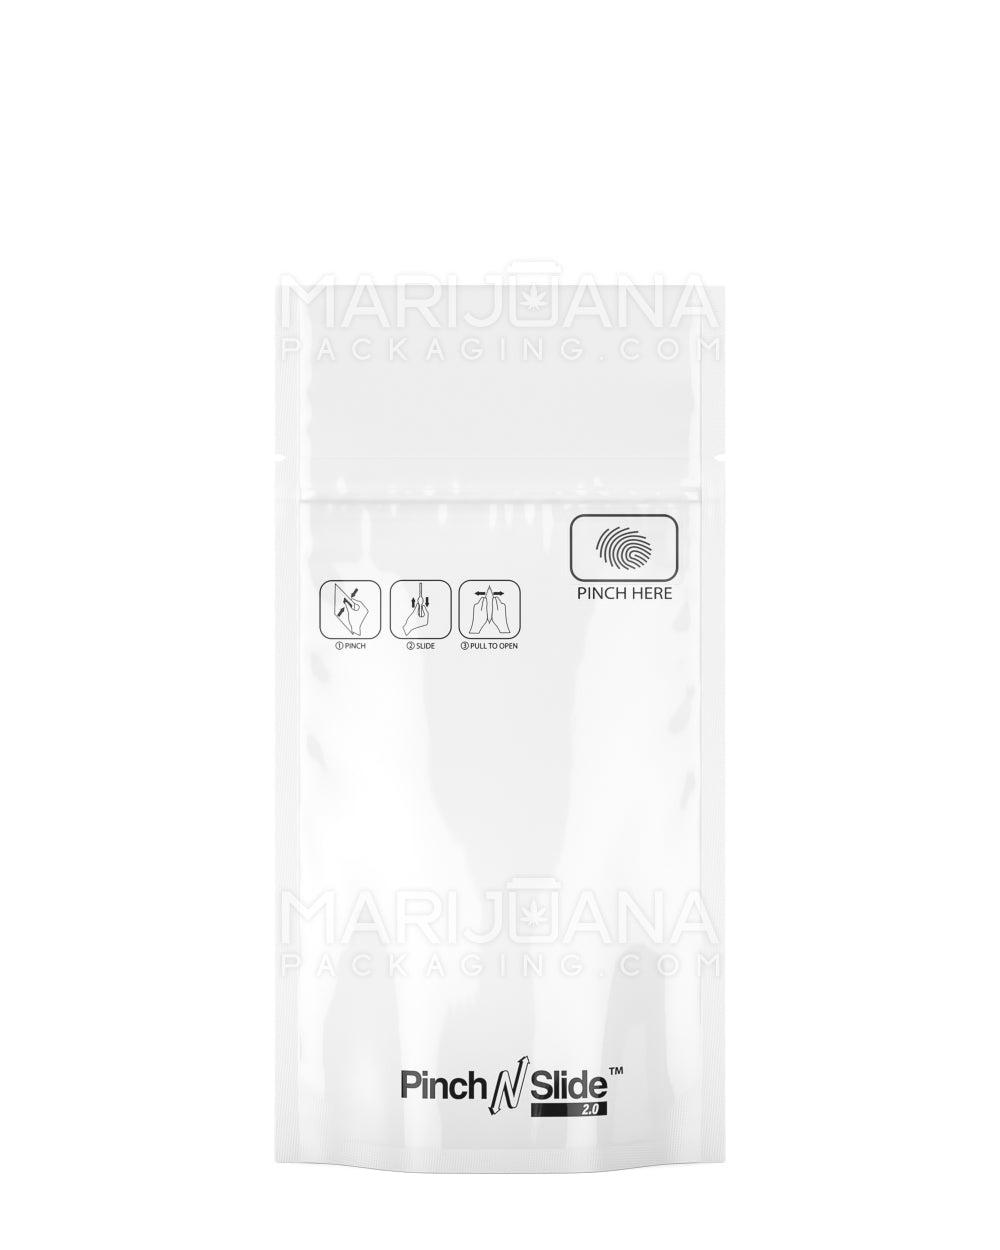 Child Resistant & Tamper Evident | Pinch N Slide 2.0 White Mylar Bags | 3.5in x 5in - 3.5g - 250 Count - 1